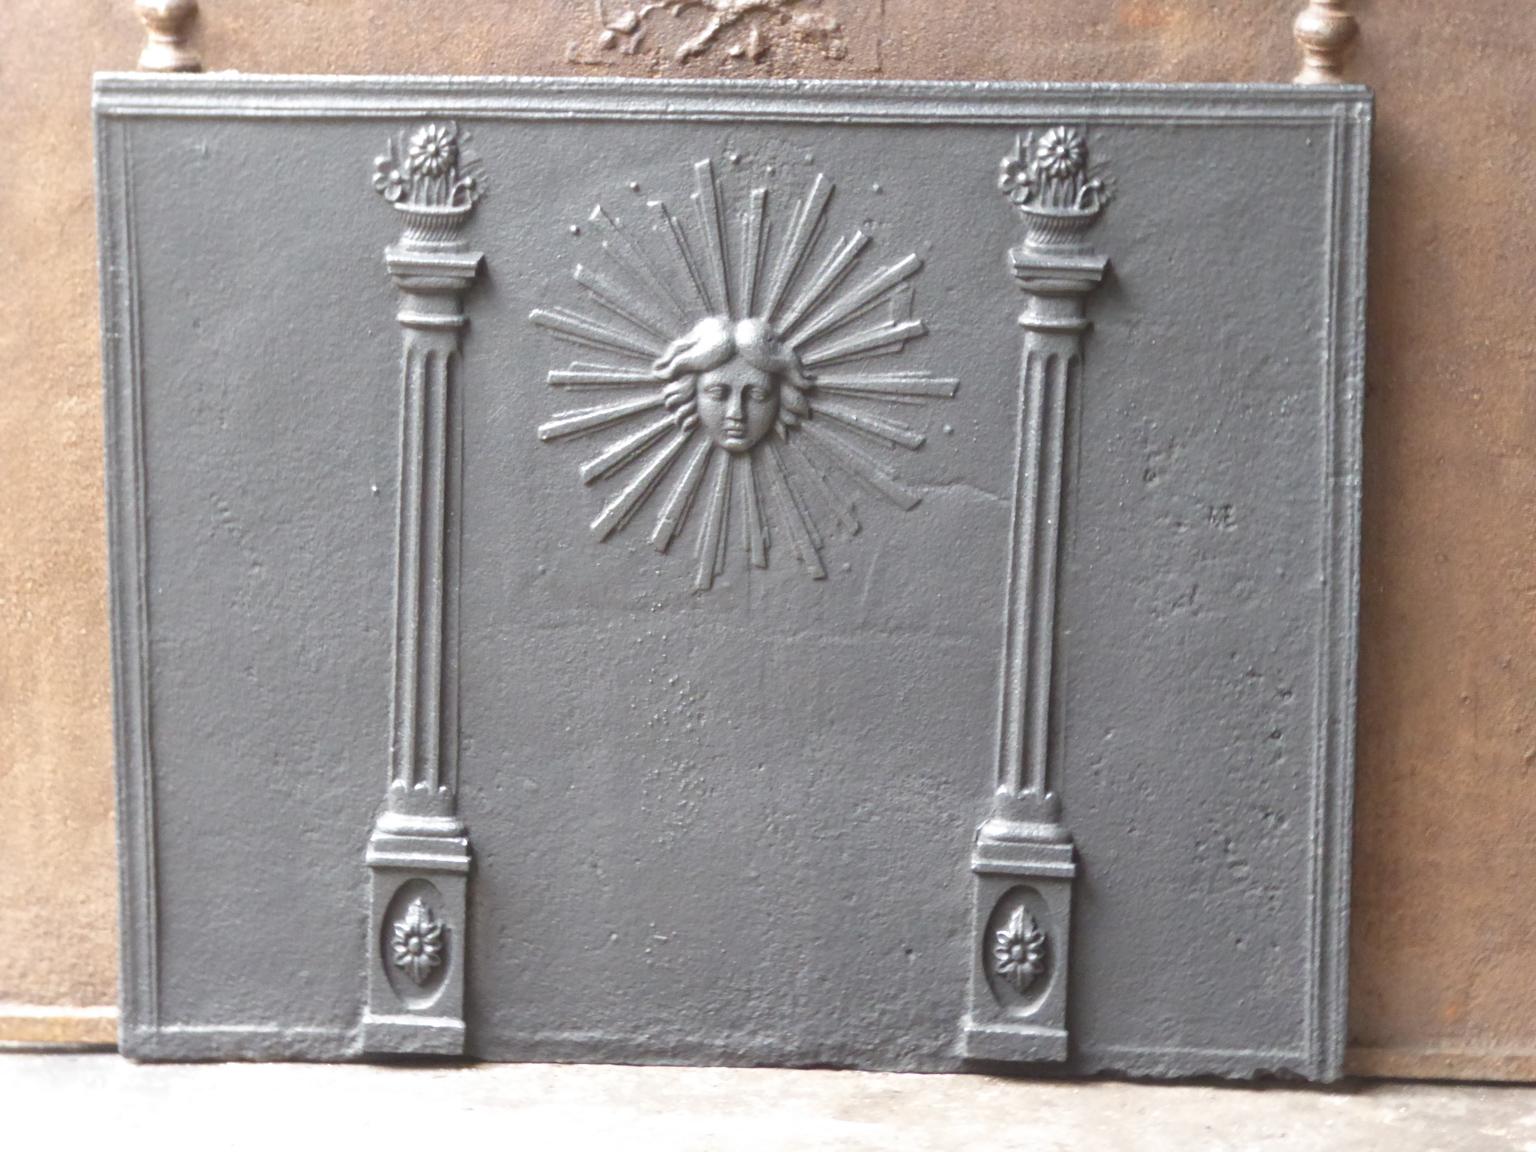 19th century French neoclassical fireback. The sun is symbol for the French King Louis XIV, called the Sun King. The sun is flanked by two pillars of freedom, which represent one of the three values of the French Revolution.

The fireback is made